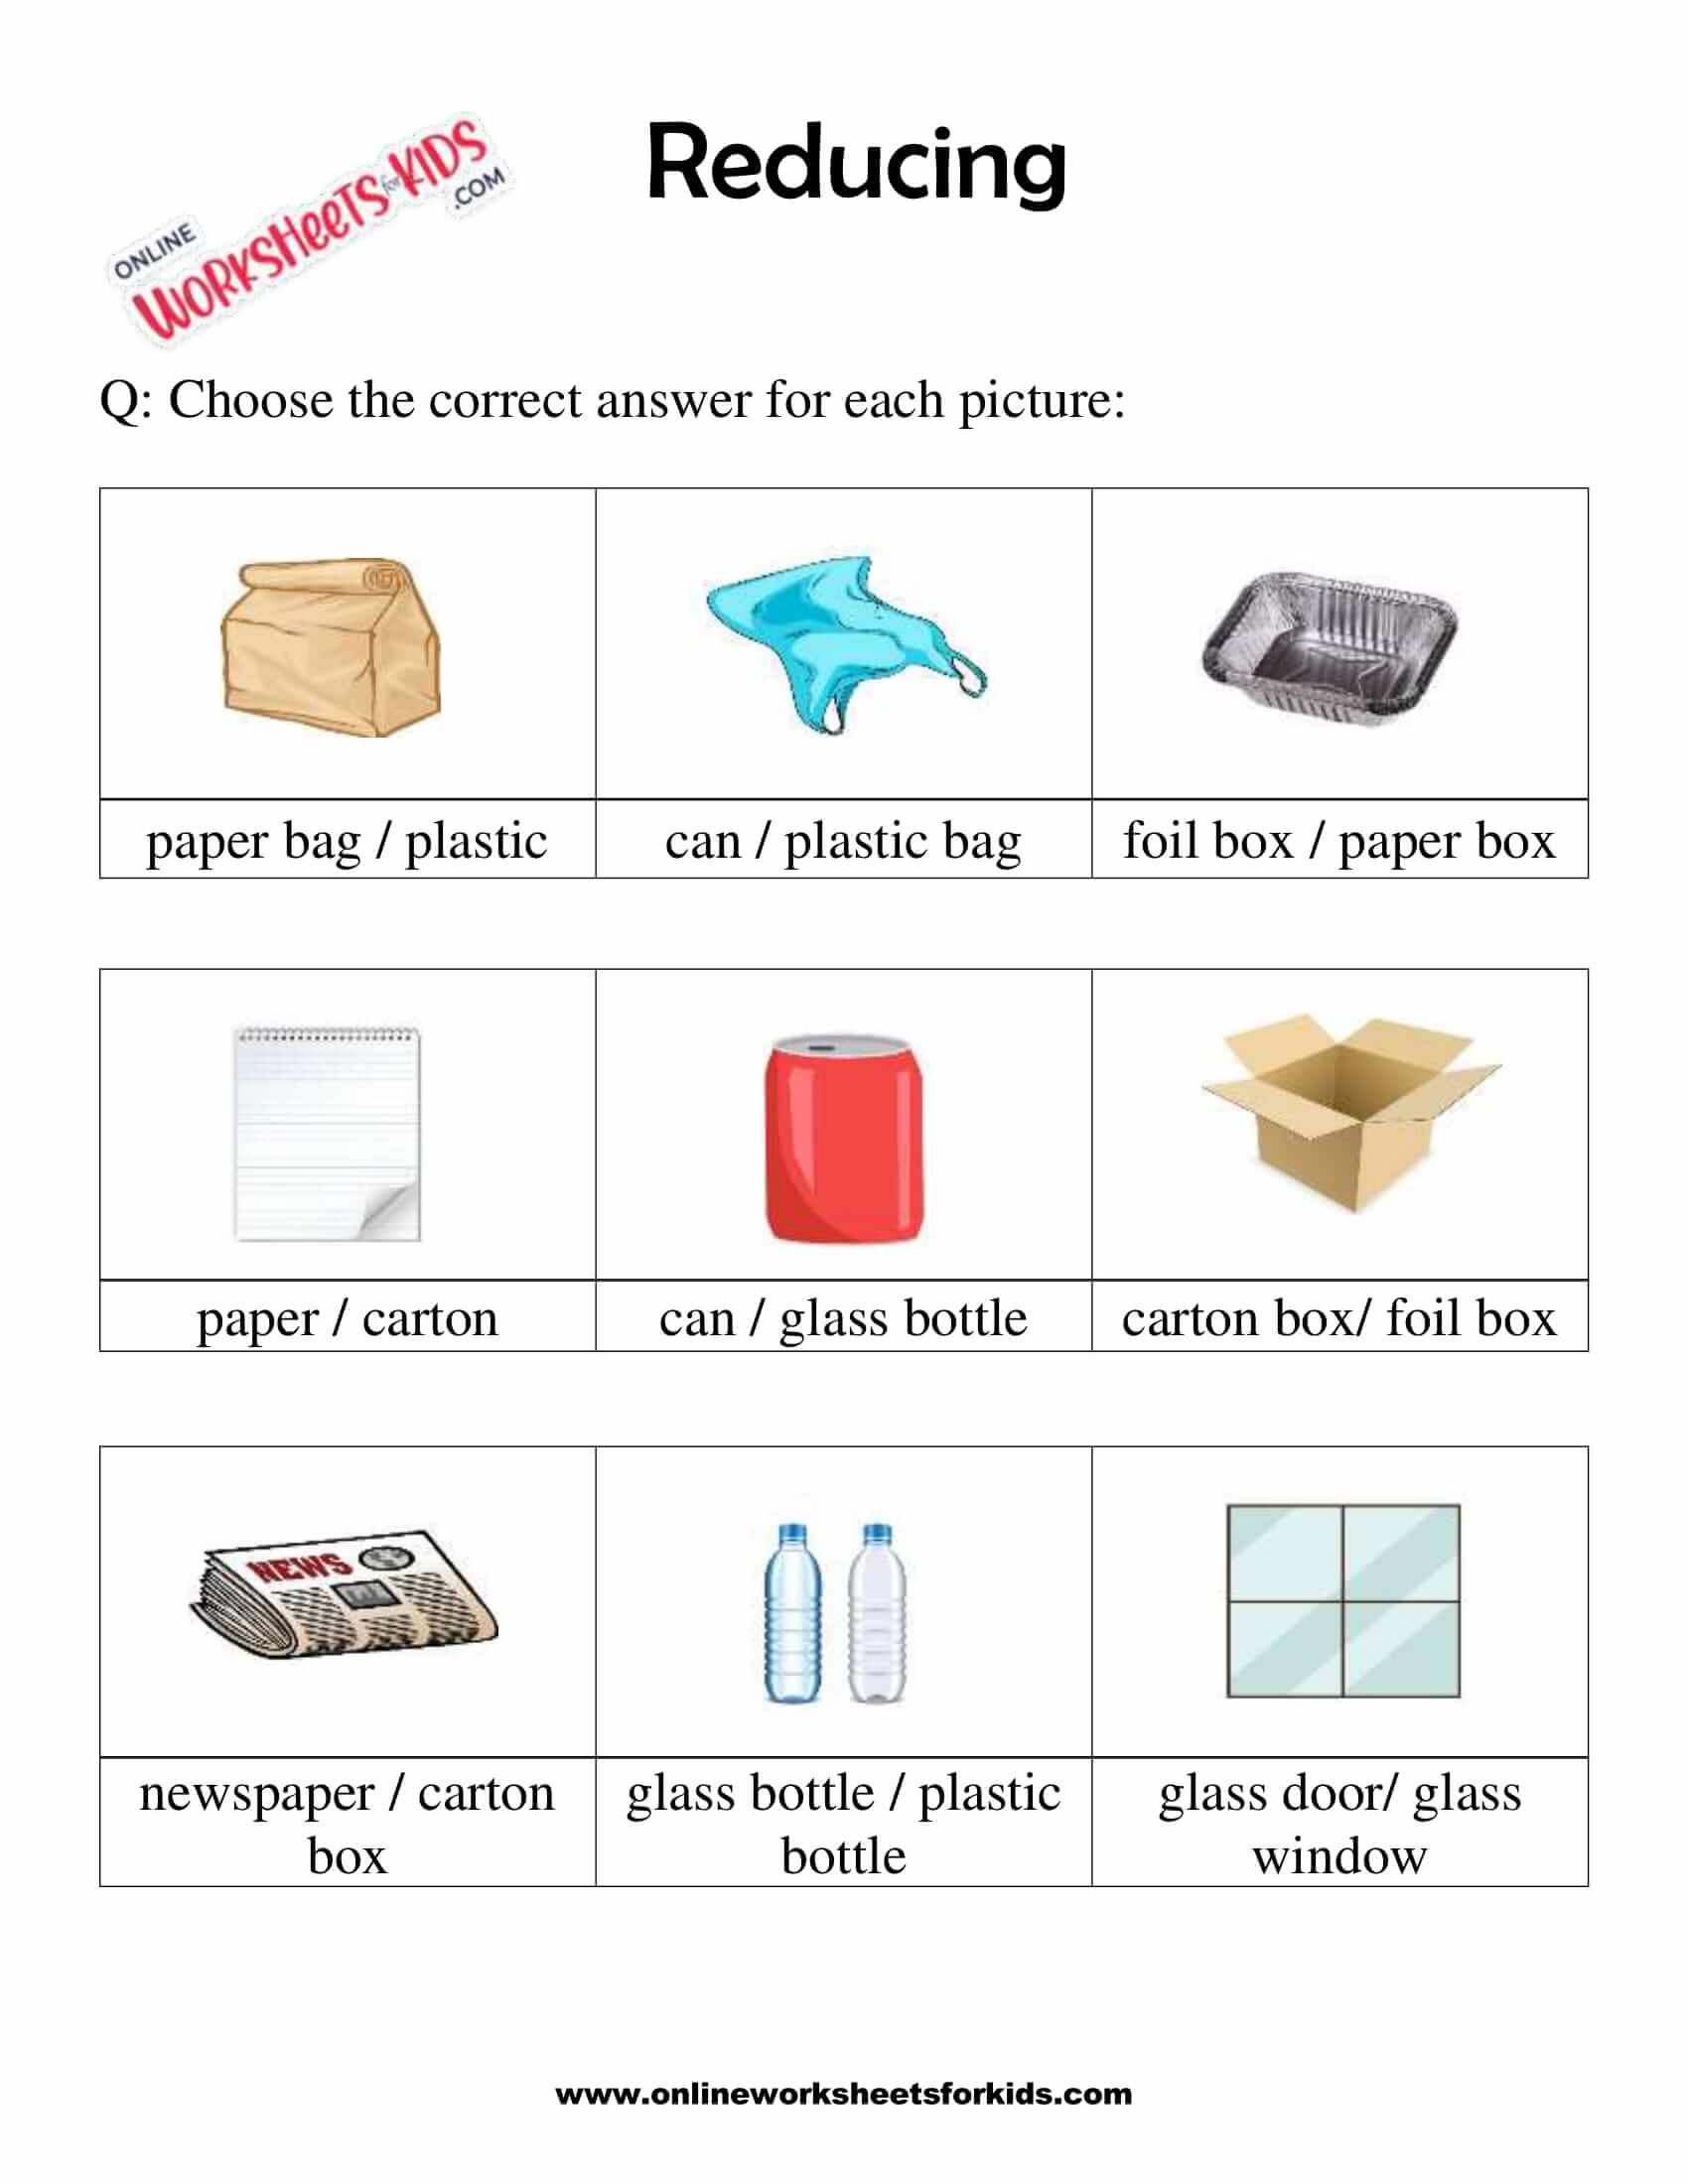 reduce-reuse-recycle-worksheets-for-1st-grade-16